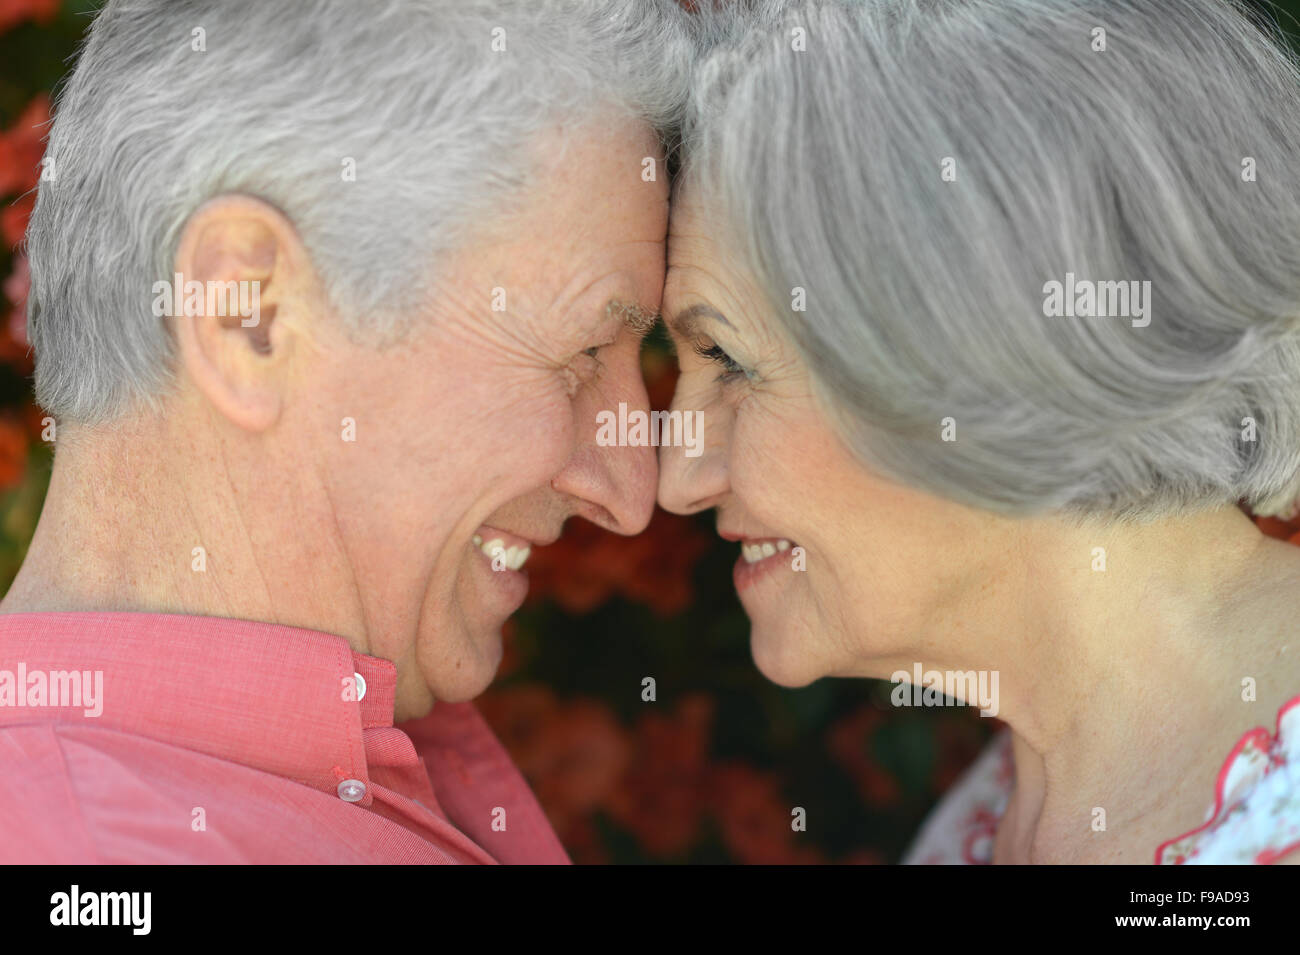 mature couple on  in summer park Stock Photo